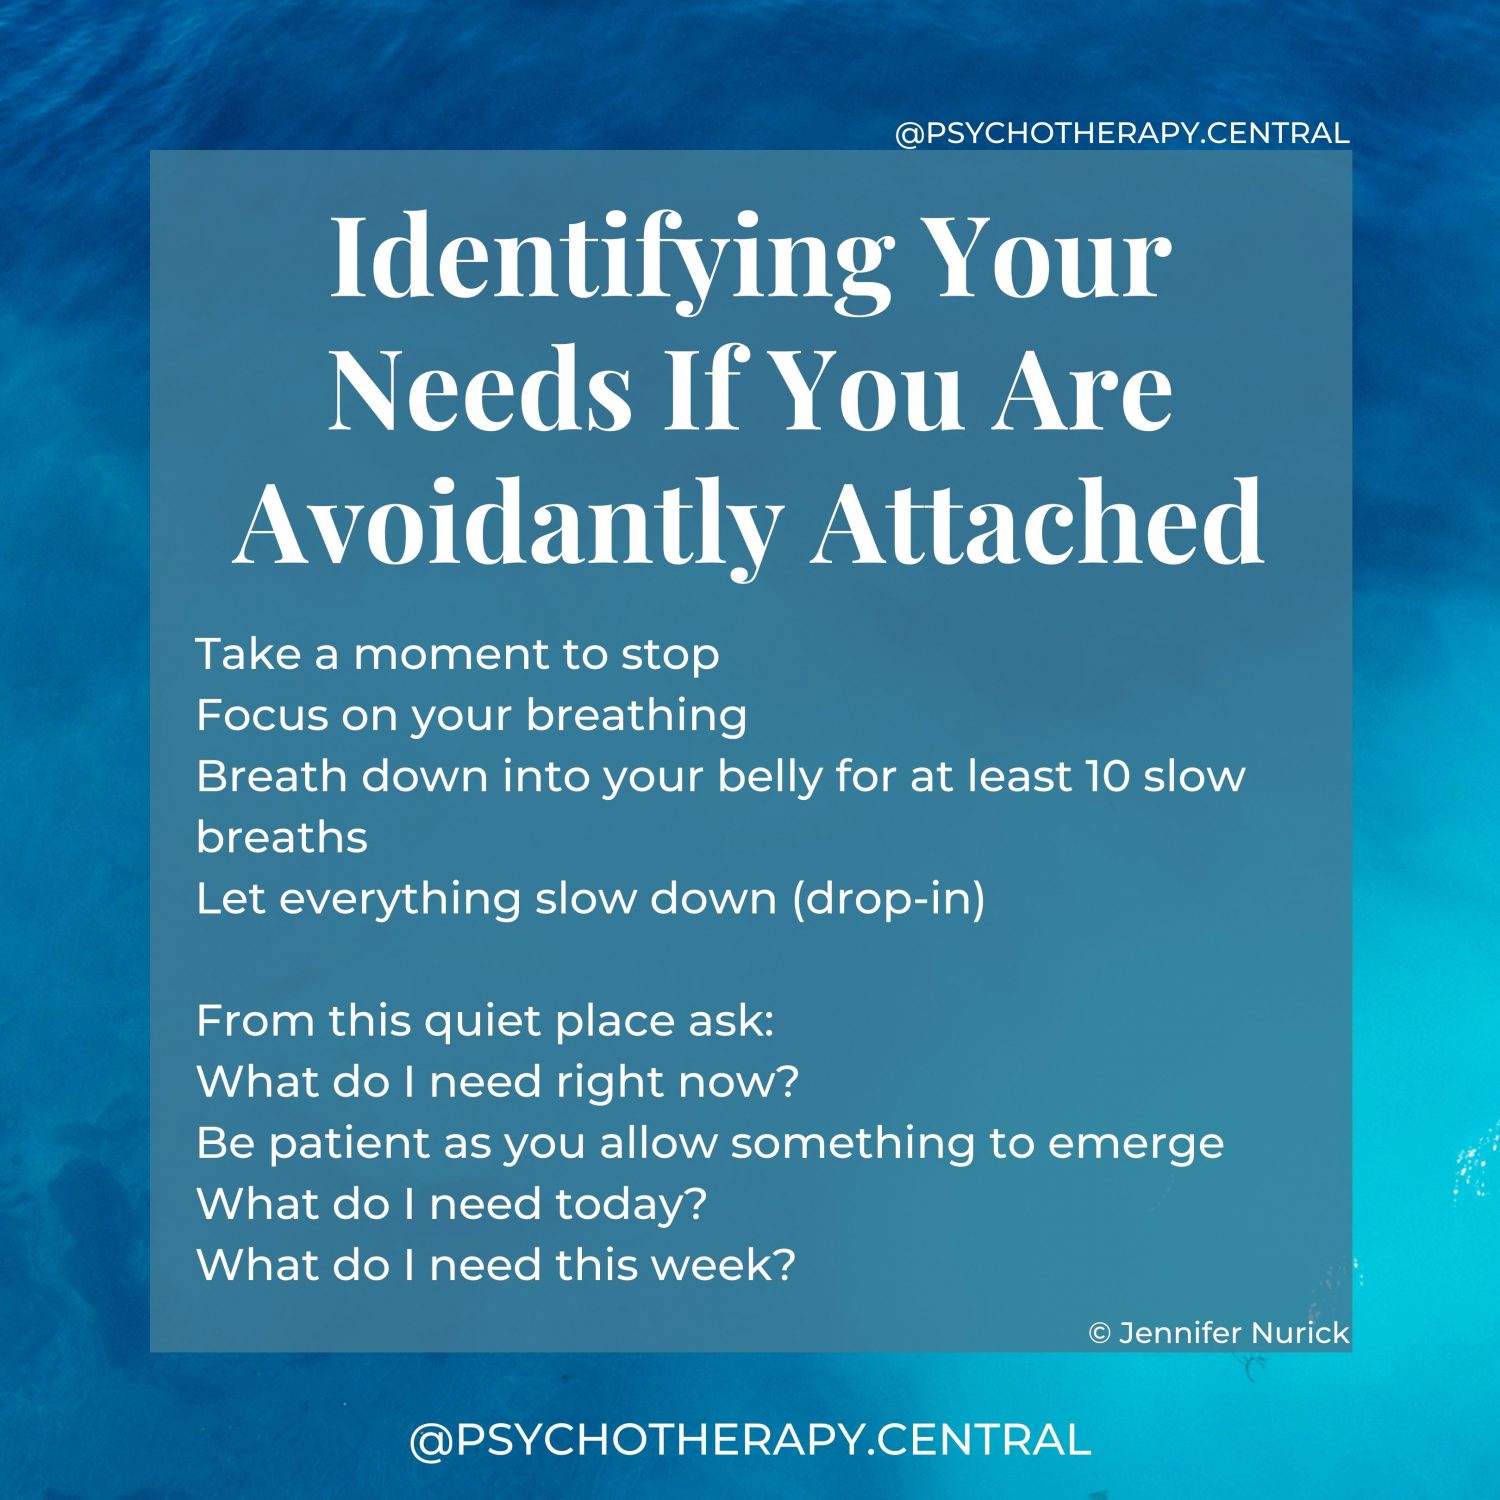 Identifying Your Needs If You Are Avoidantly Attached Take a moment to stop Focus on your breathing Breath down into your belly for at least ten slow breaths Let everything slow down (drop-in) From this quiet place ask: What do I need right now? Be patient as you allow something to emerge What do I need today? What do I need this week?